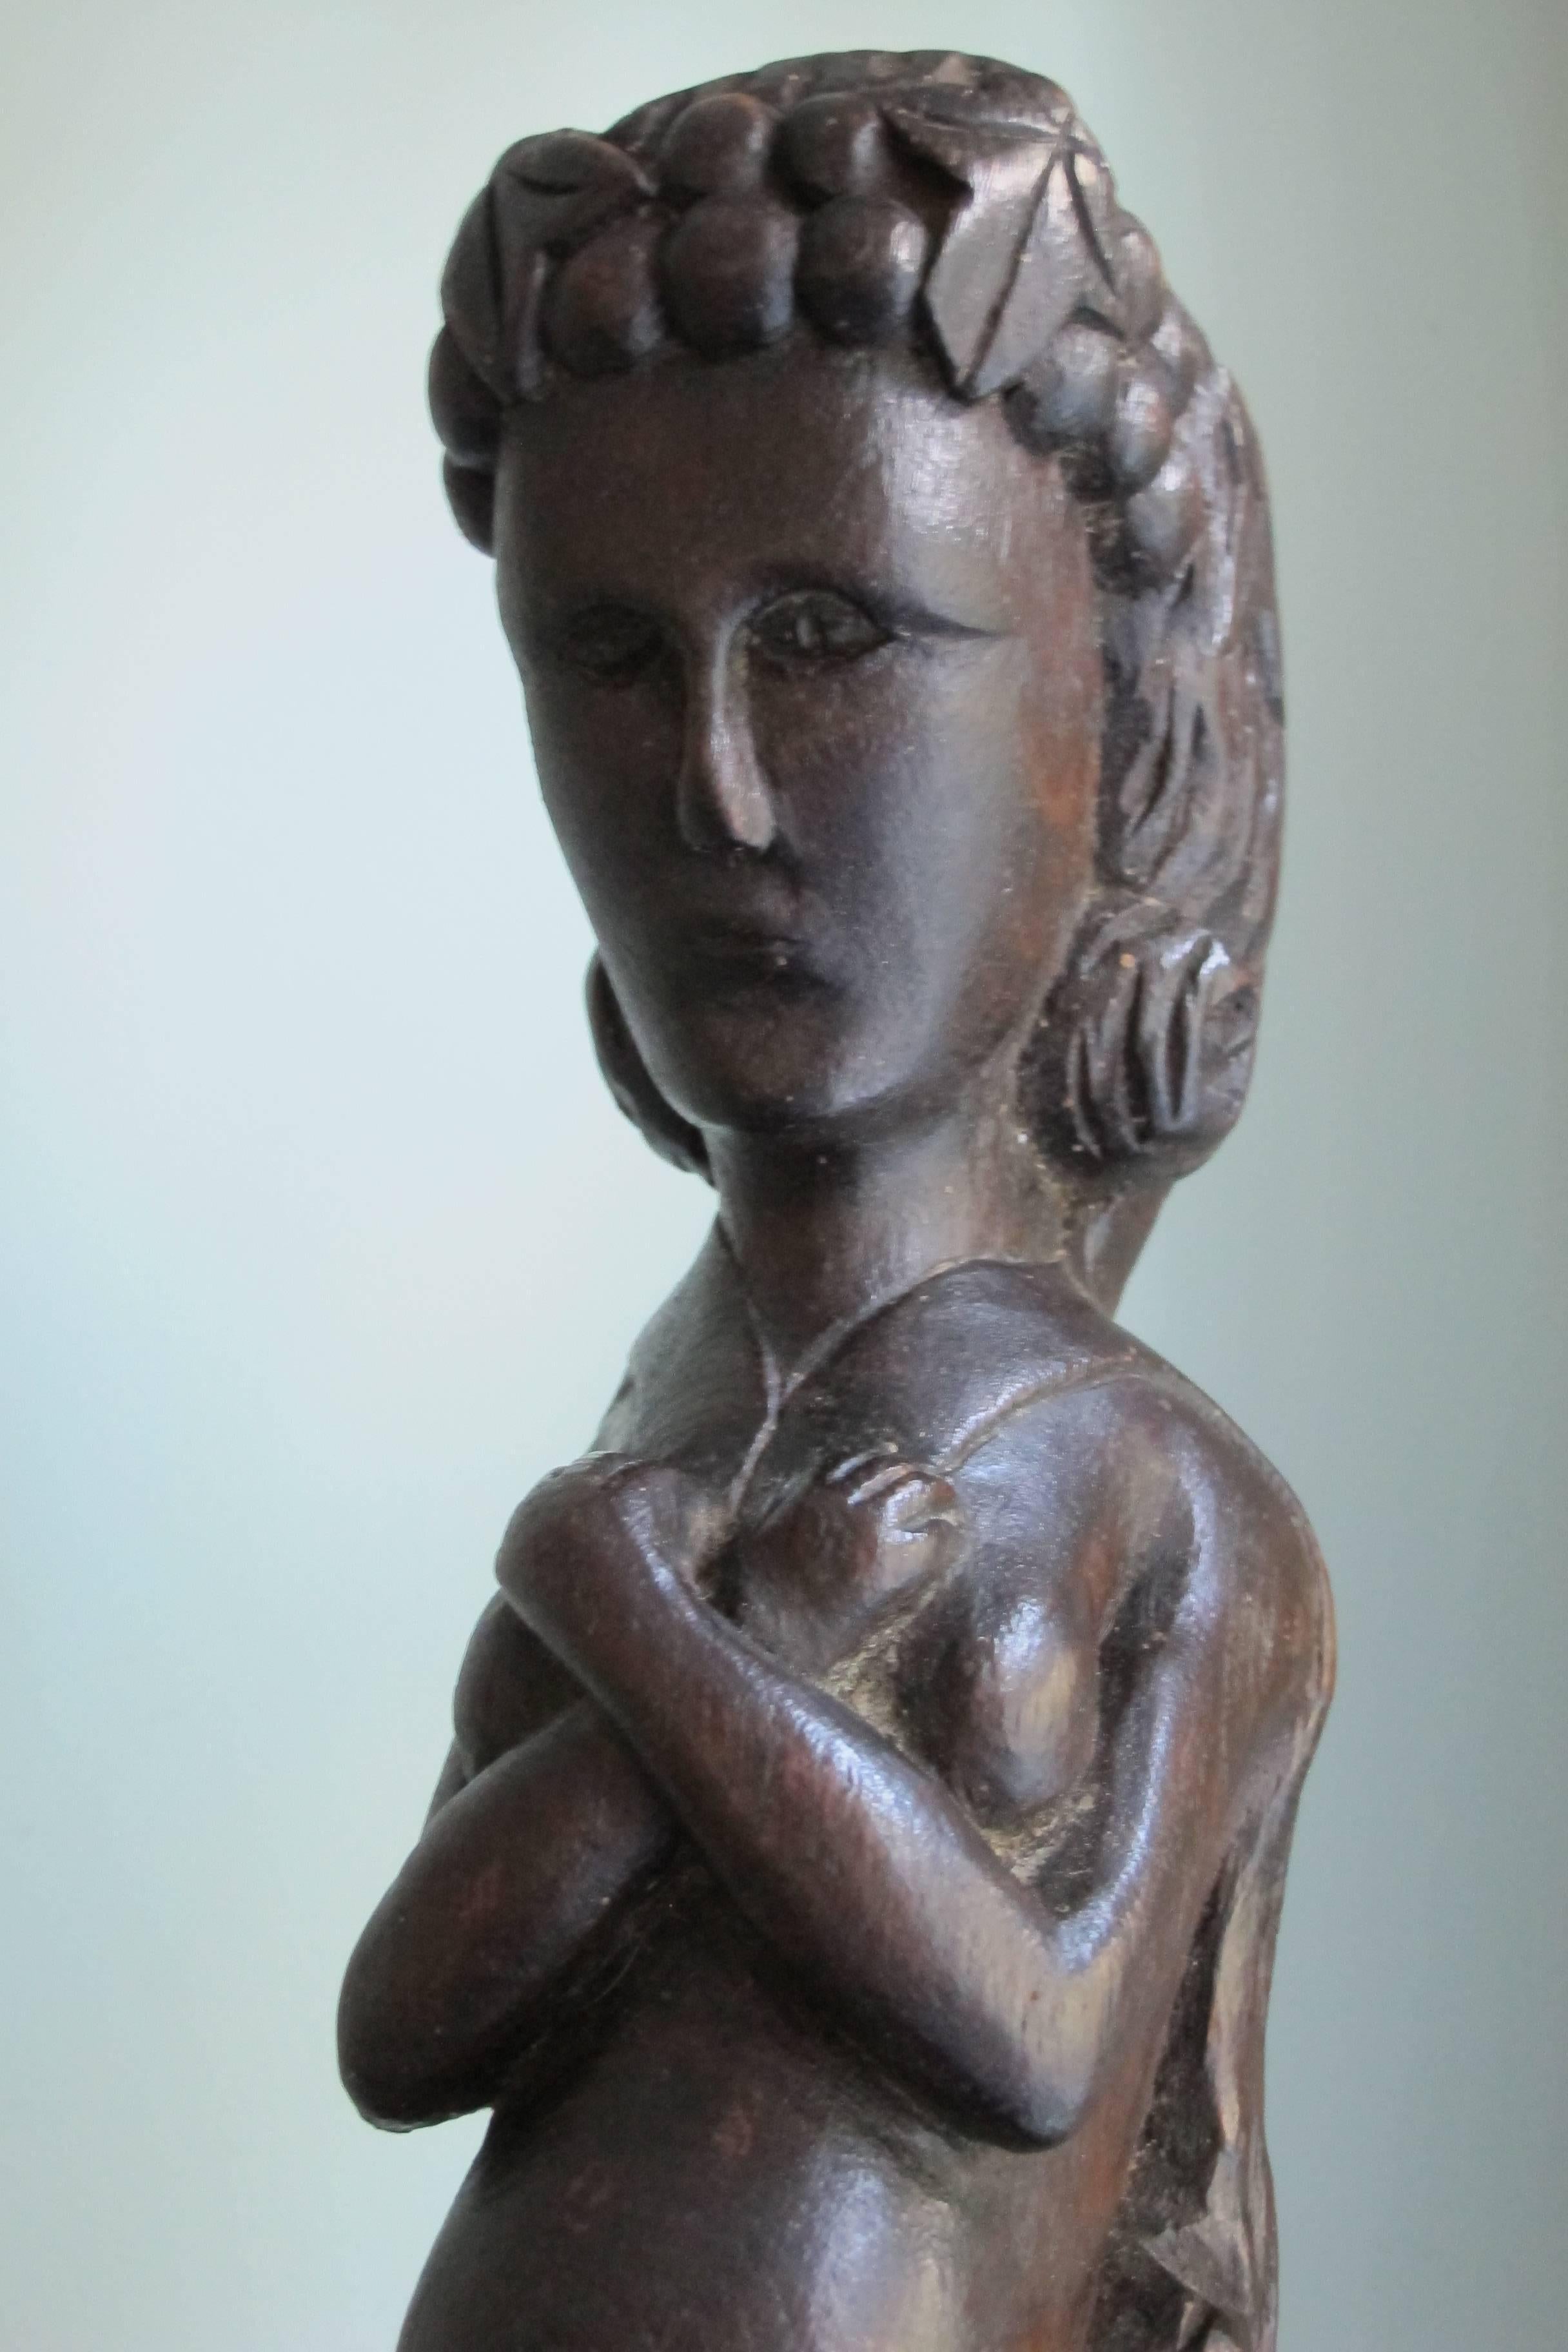 Folk Art Carved Wood Caryatid Figure with Arms Crossed over Breasts For Sale